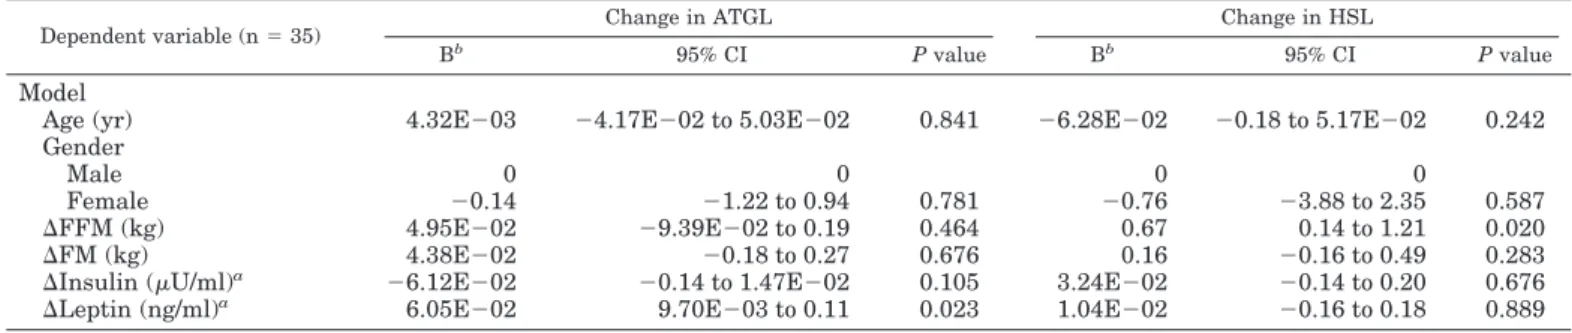 TABLE 3. Determinants of change in ATGL and HSL protein level after a 10-wk hypocaloric diet in multivariate regression analysis